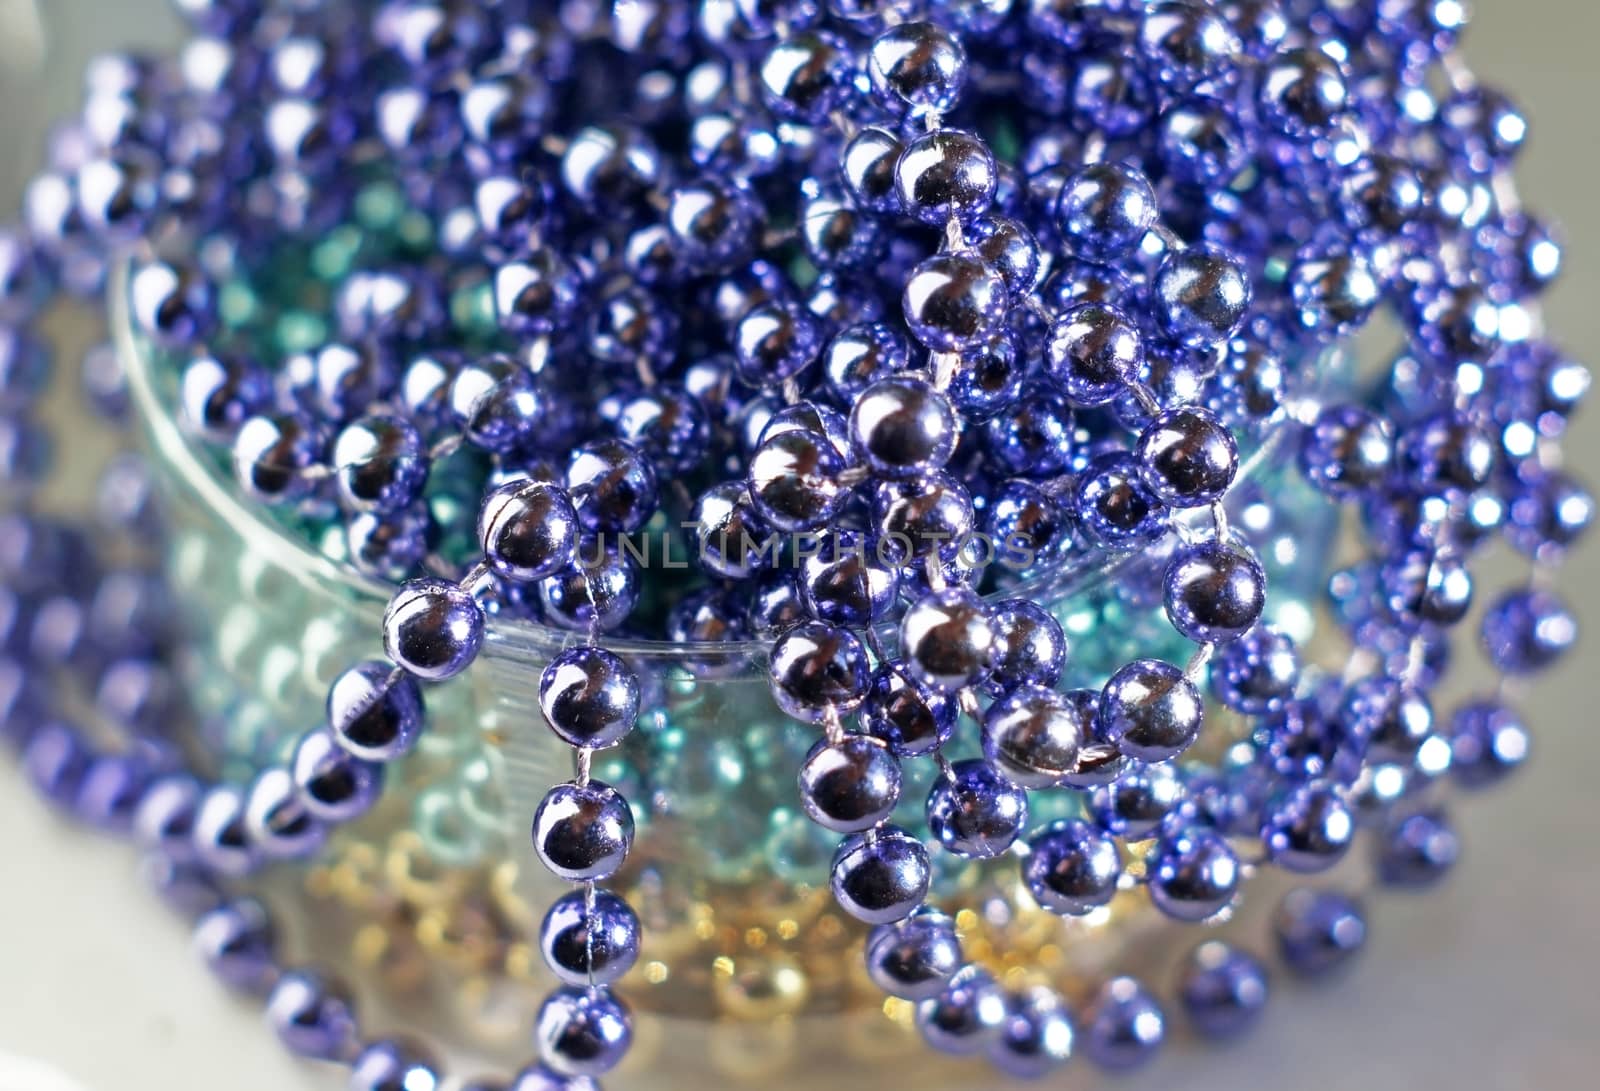 Lilac glass beads as abstract background                              